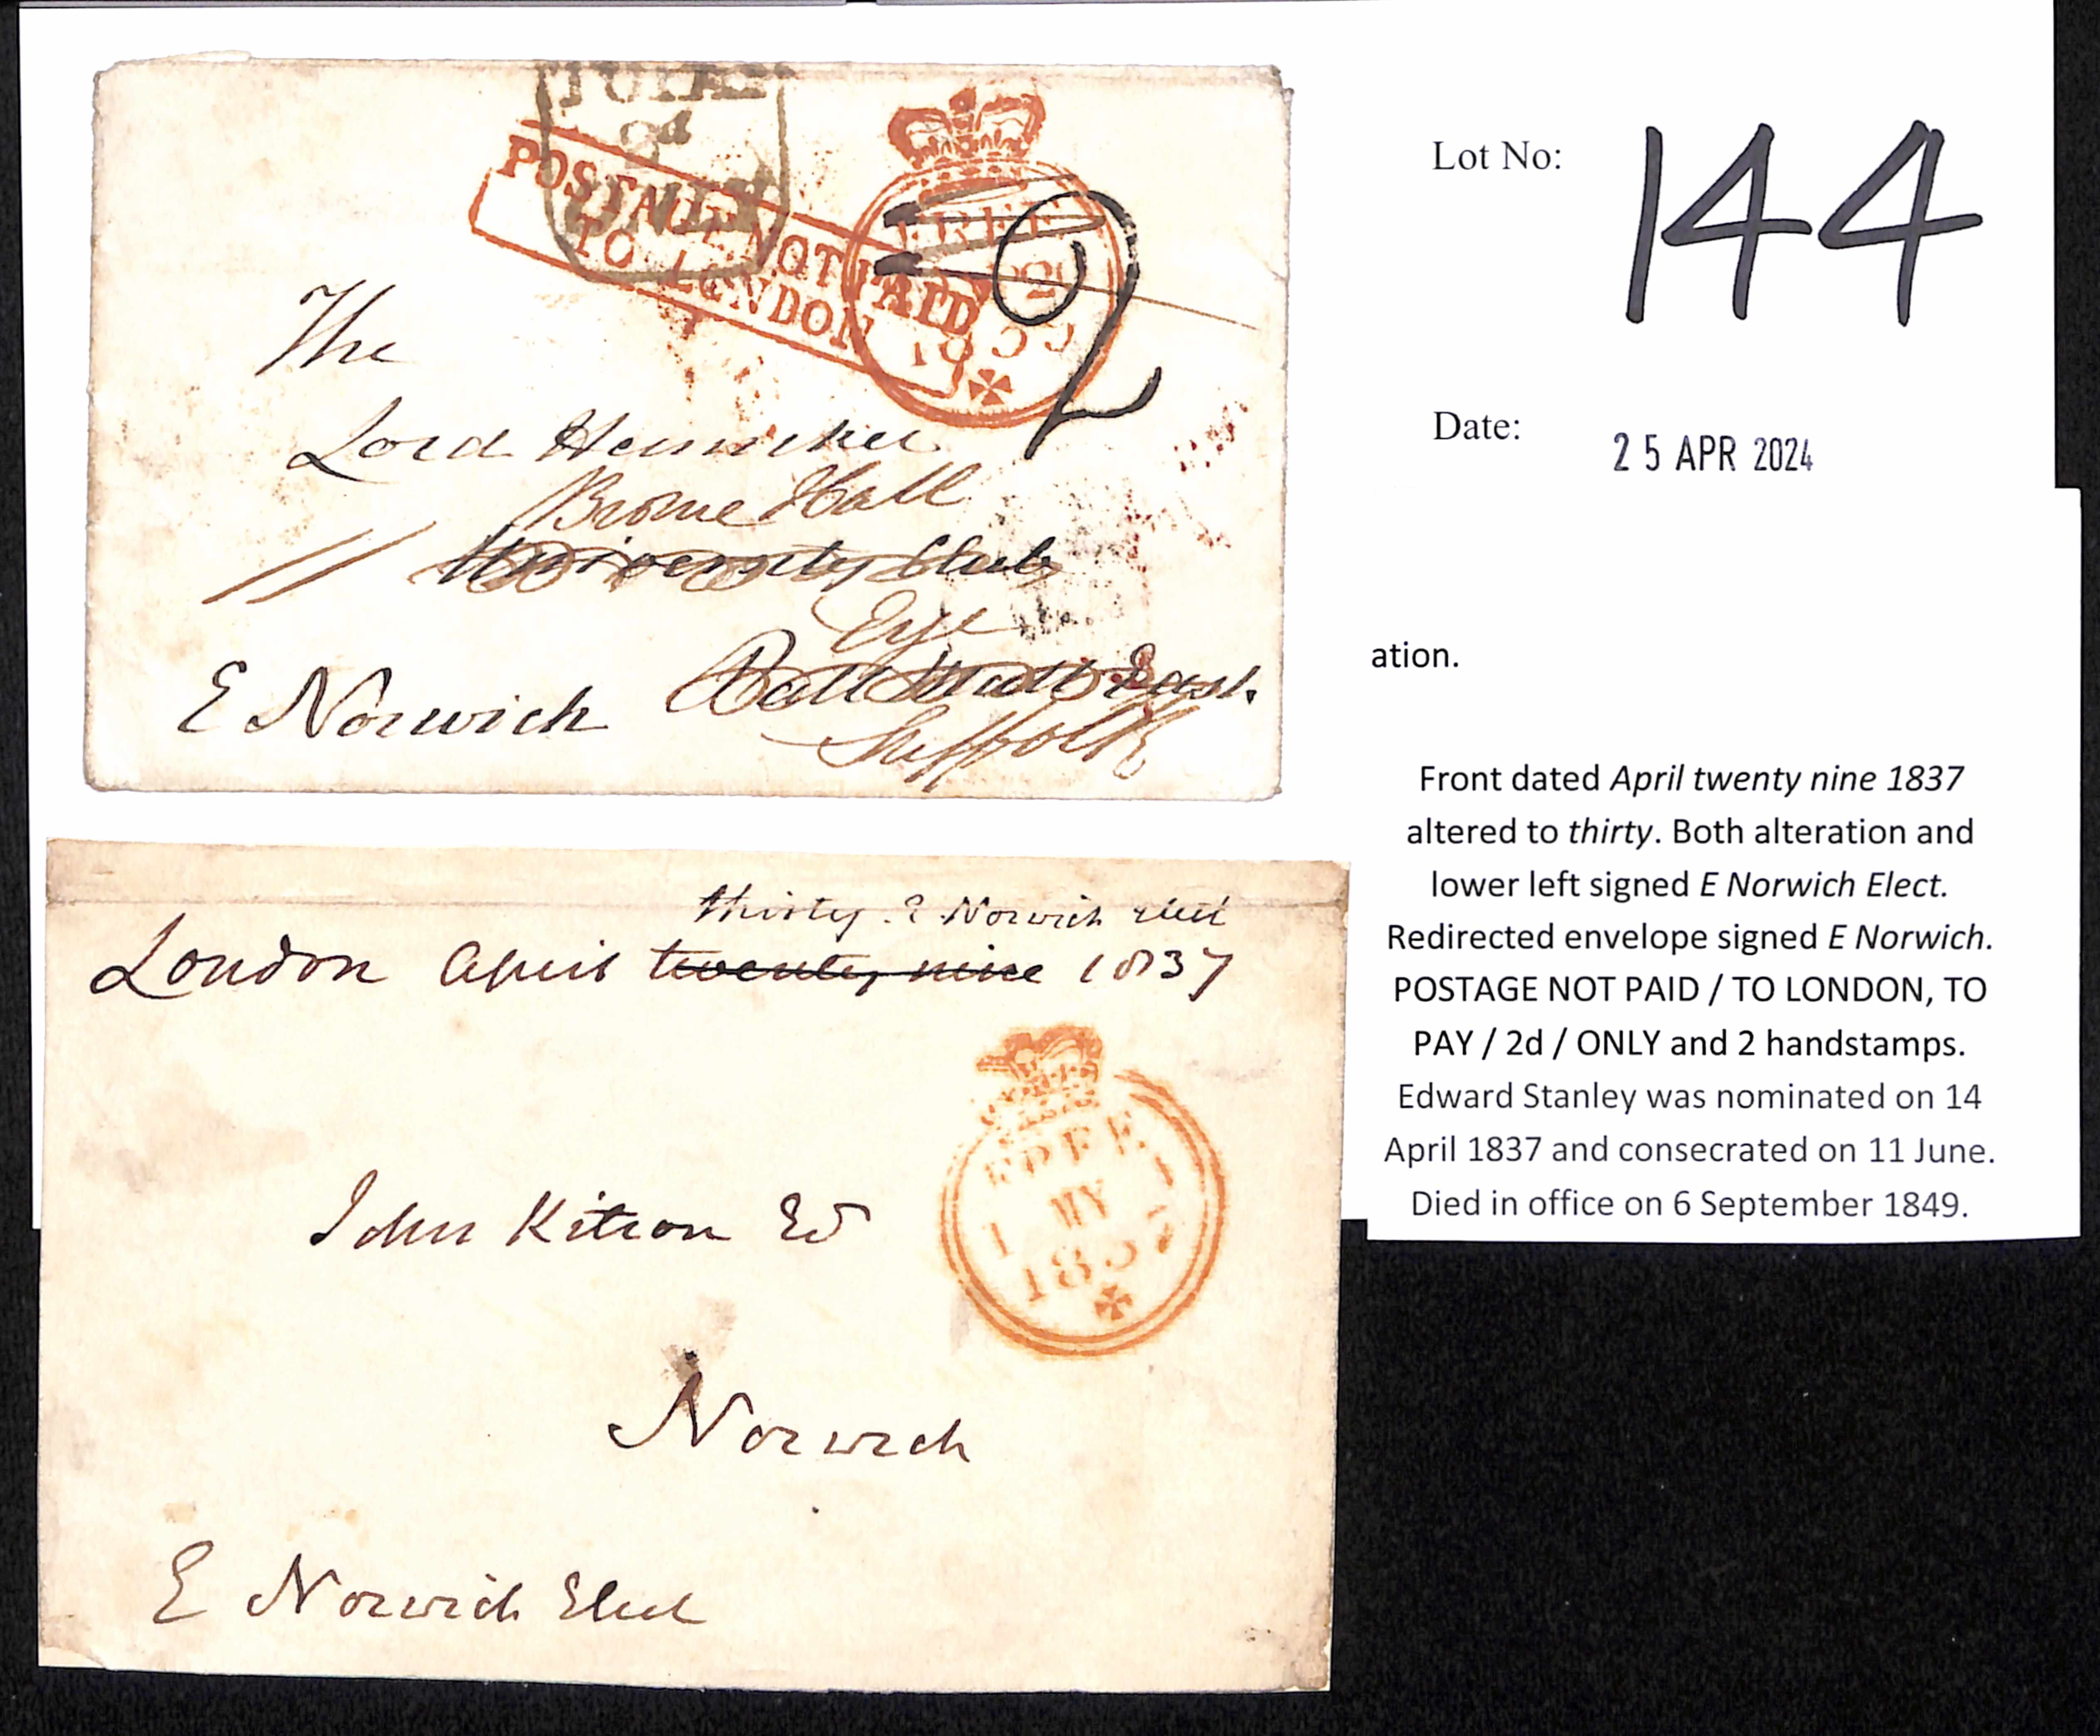 1837-39 Front and envelope from the Bishop of Norwich, the front posted on April 30 1837 during - Image 2 of 4